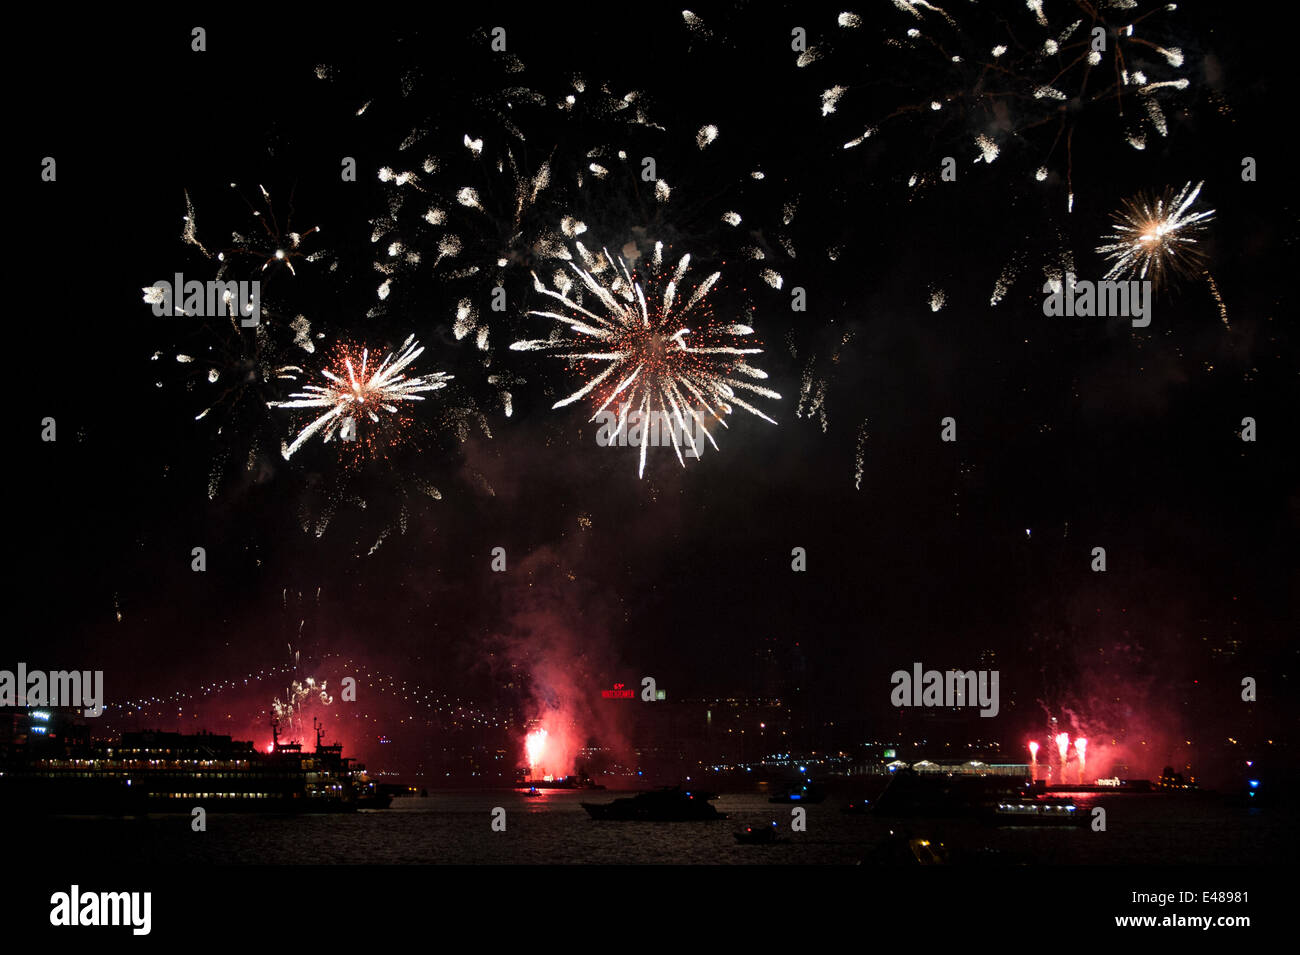 New York, N.Y. — On July 4, 2014, fireworks exploded on the East River over the Brooklyn Bridge in celebration of the signing of the Declaration of Independence 238 years ago, when the American colonies declared their independence from Great Britain. (© Terese Loeb Kreuzer) Stock Photo